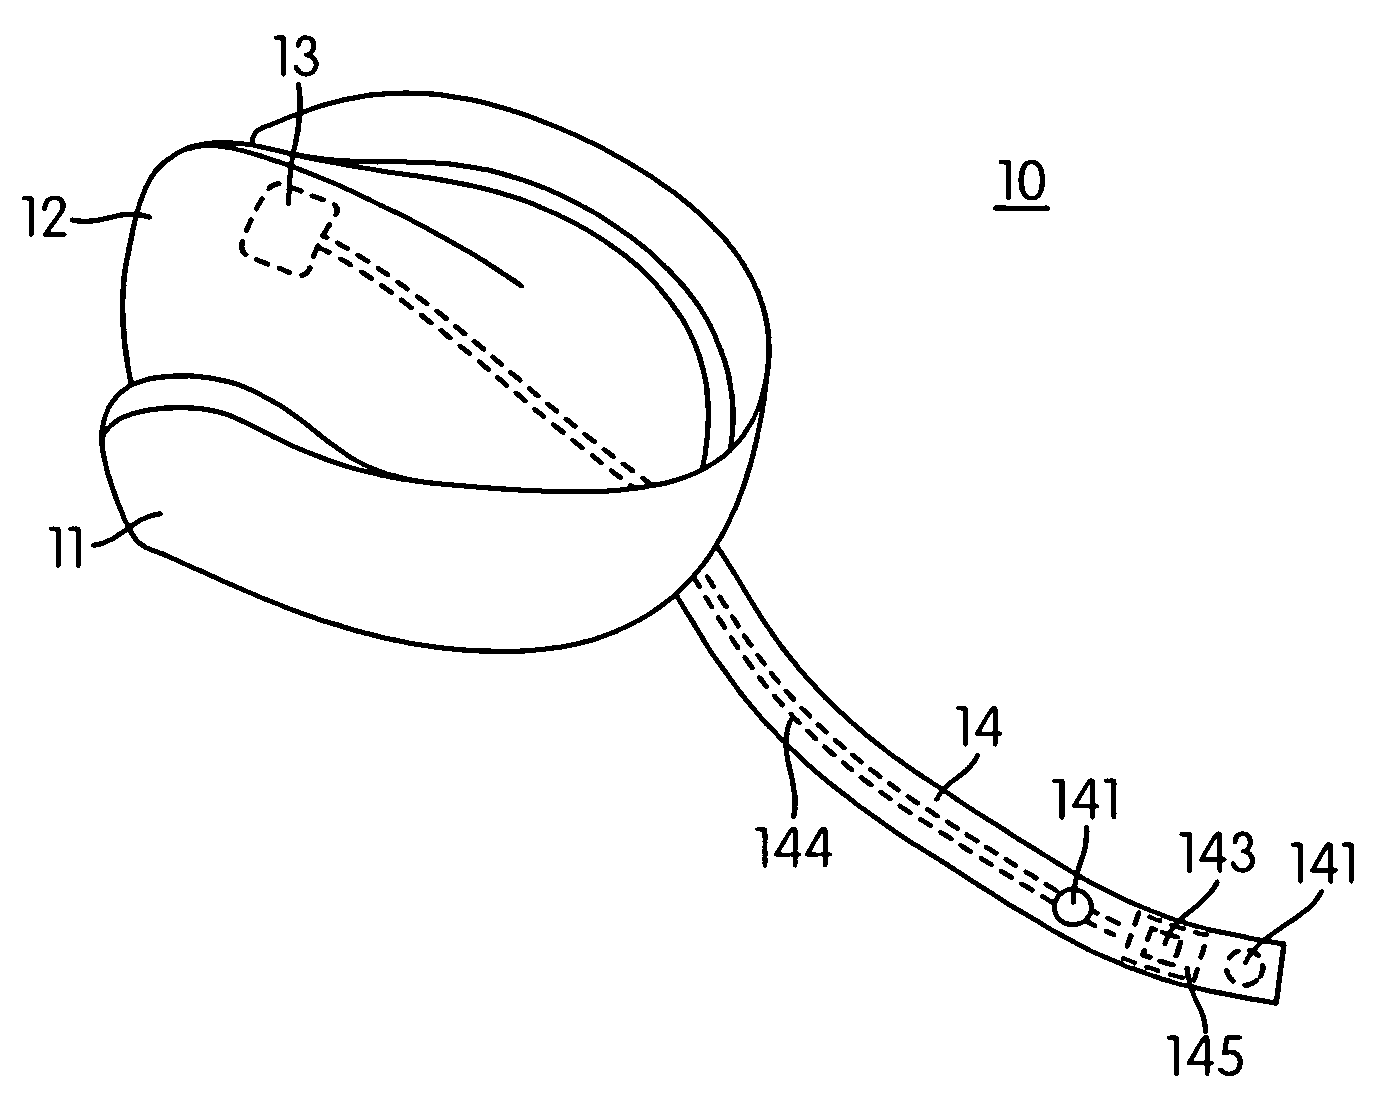 Athletic mouthpiece capable of sensing linear and rotational forces and protective headgear for use with the same